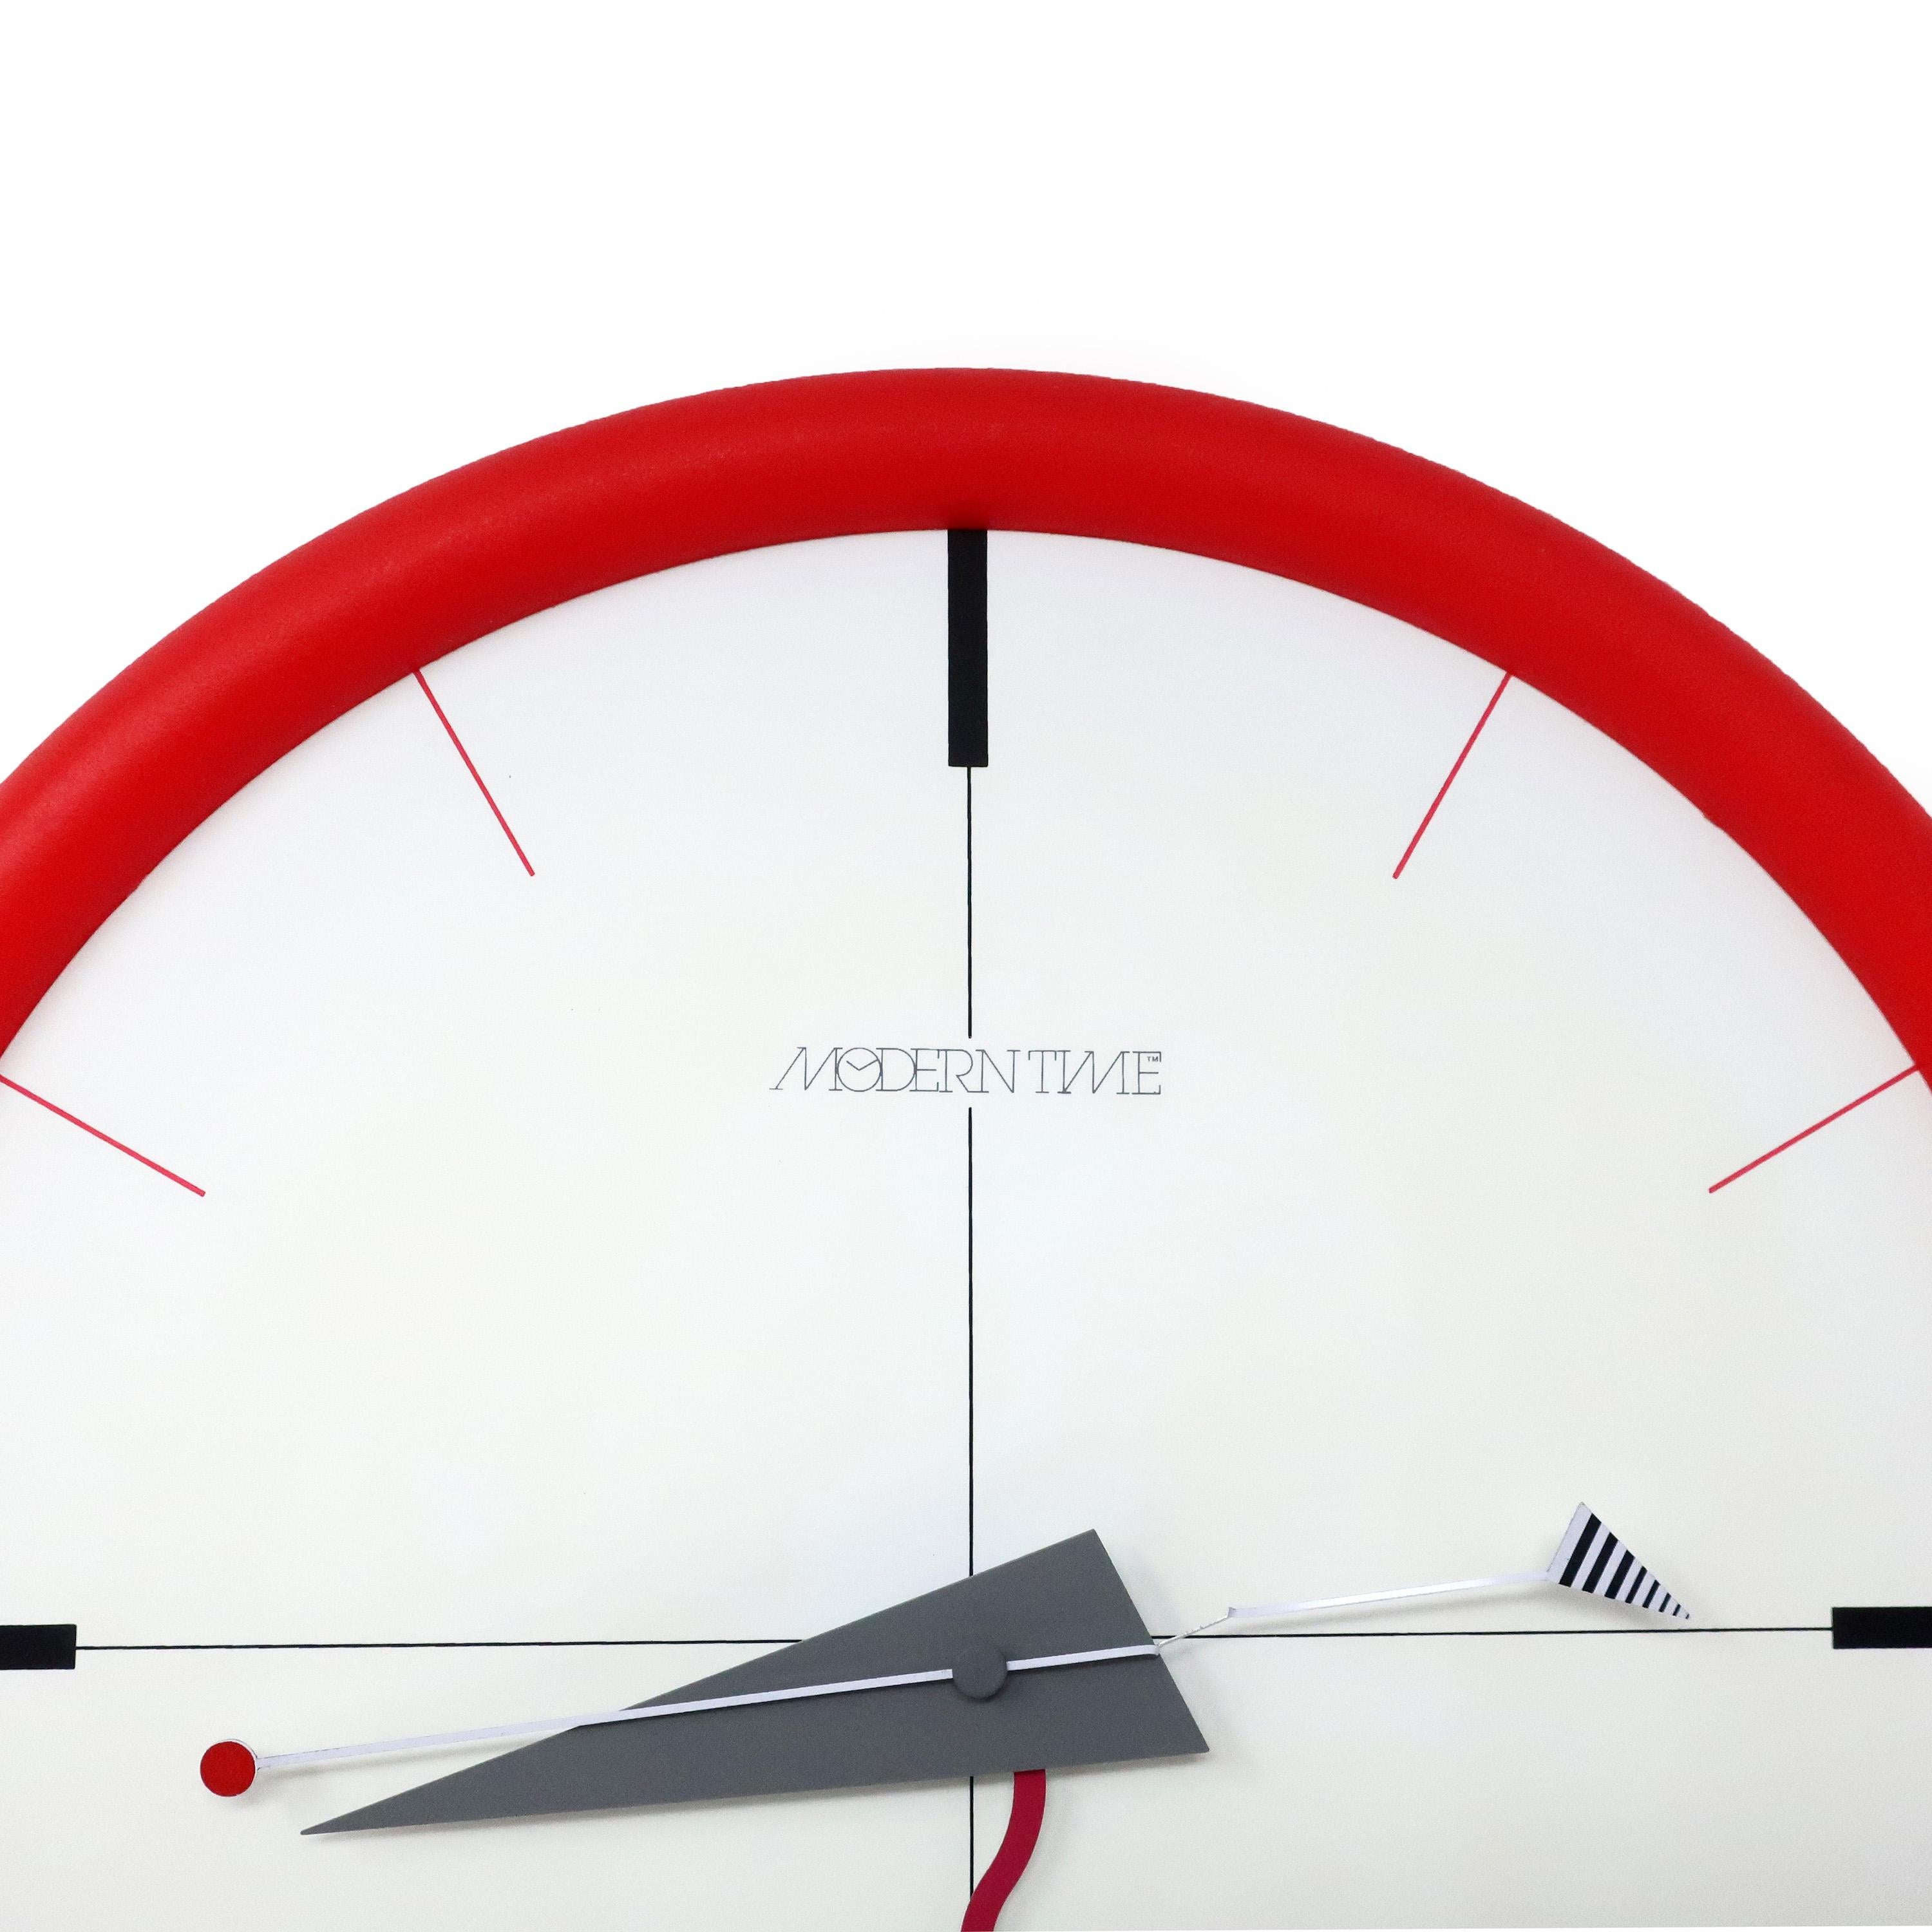 A stunning postmodern wall clock with multi-color accents from Canetti's Moderntime Collection. Red plastic frame, white face, and red, black, and gray accents. It perfectly walks a line between understated & sophisticated and bright &